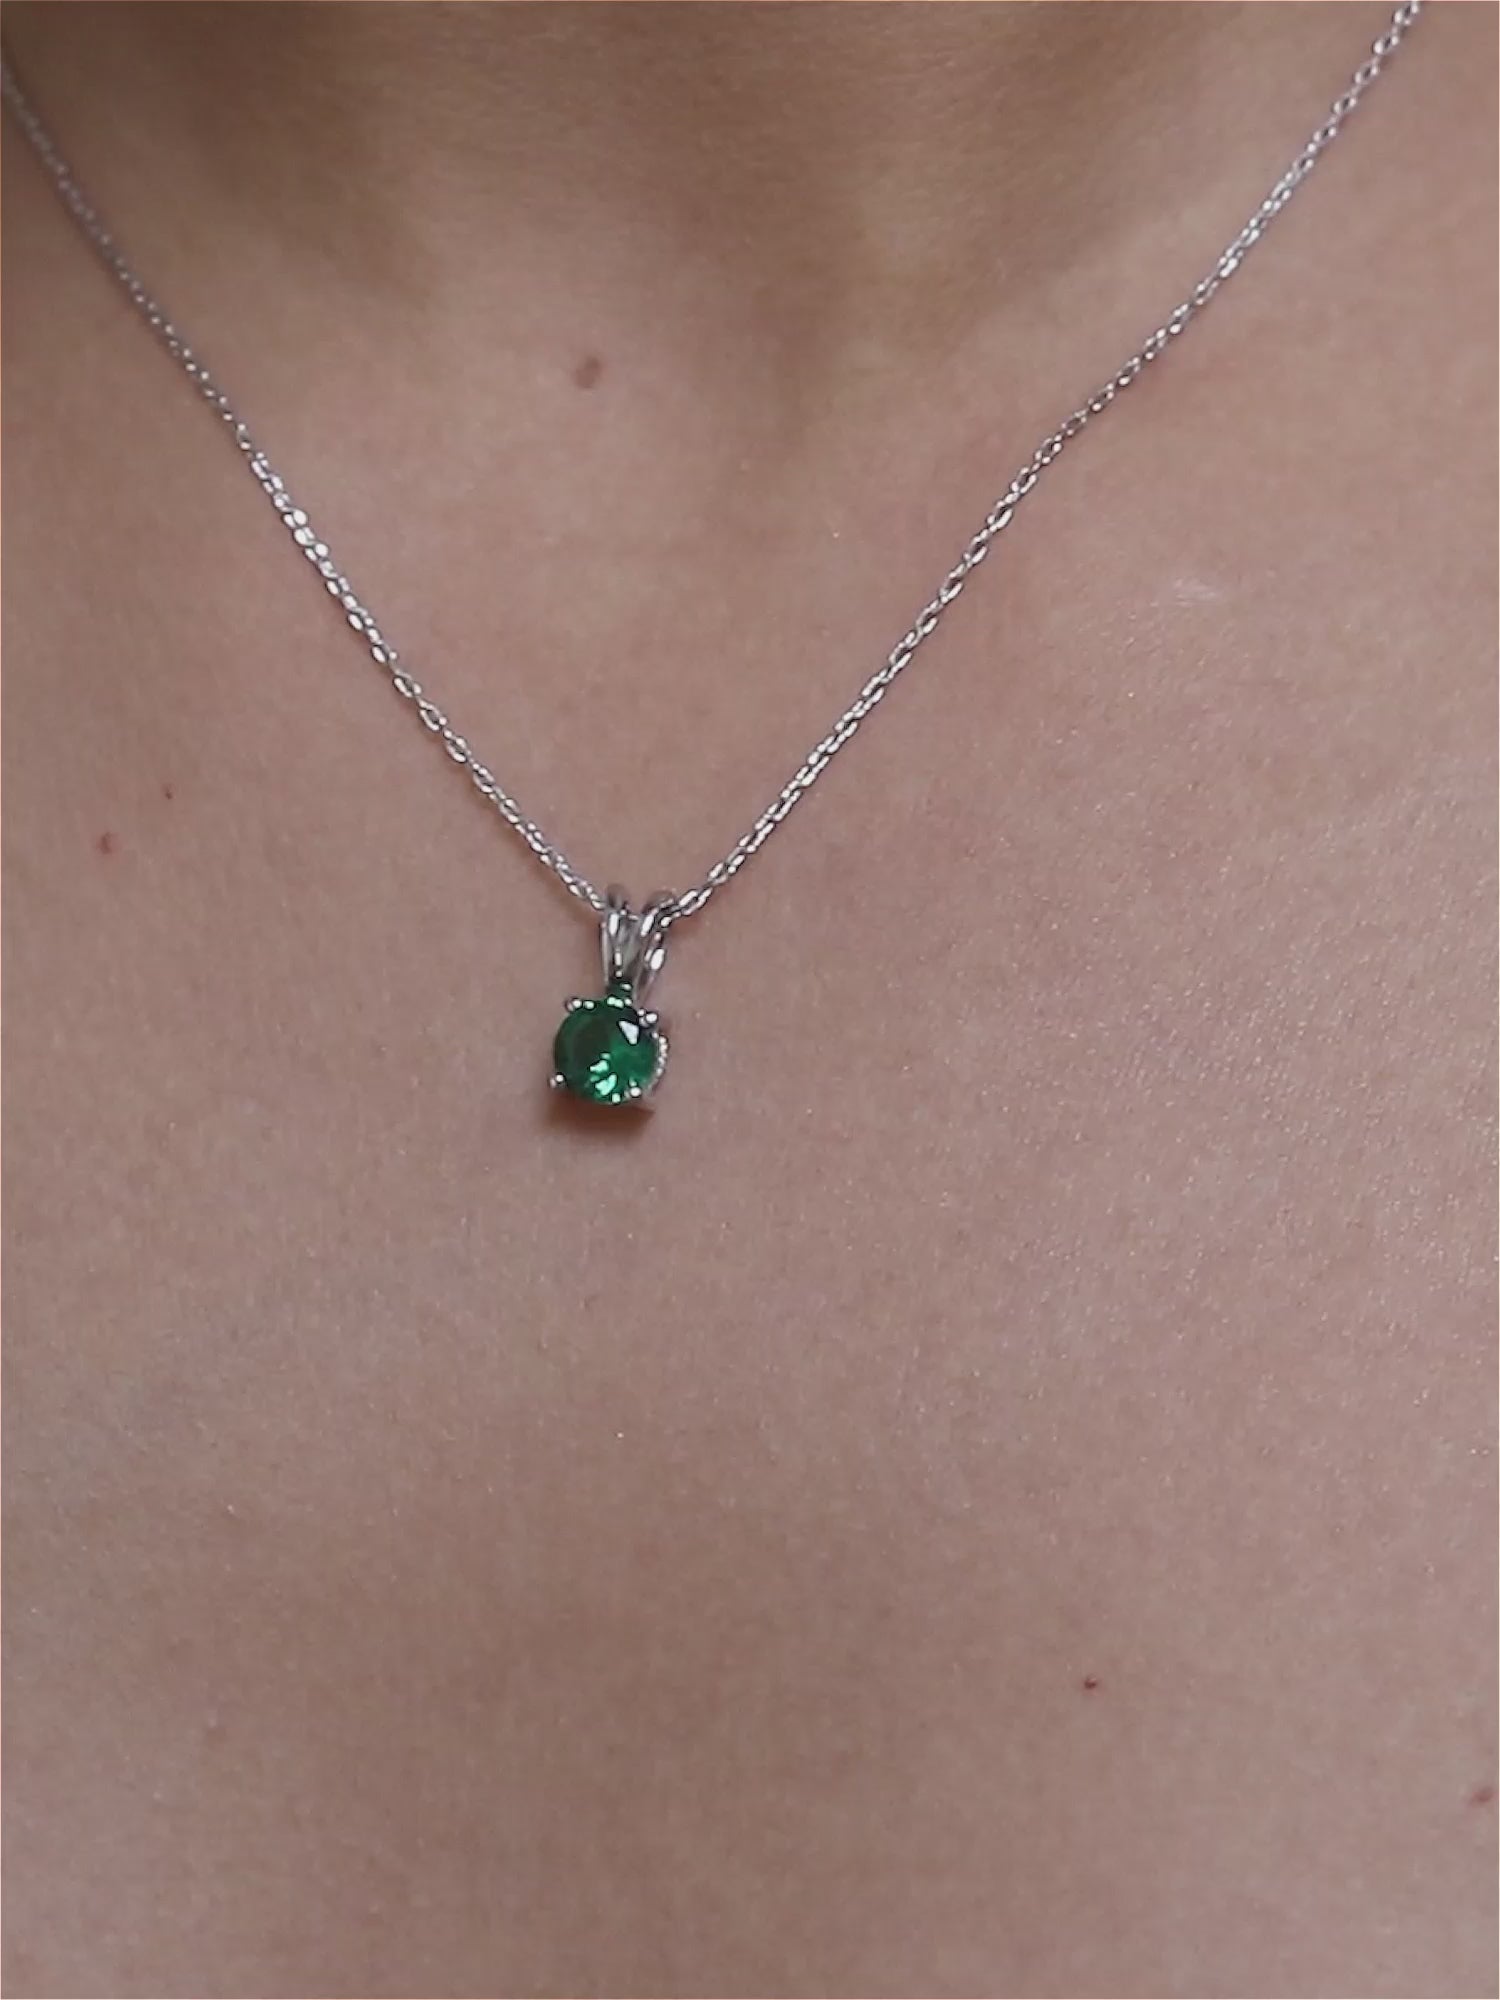 Nice 1.5 carat Emerald pendant For babies made with 18k Gold - Gleam Jewels